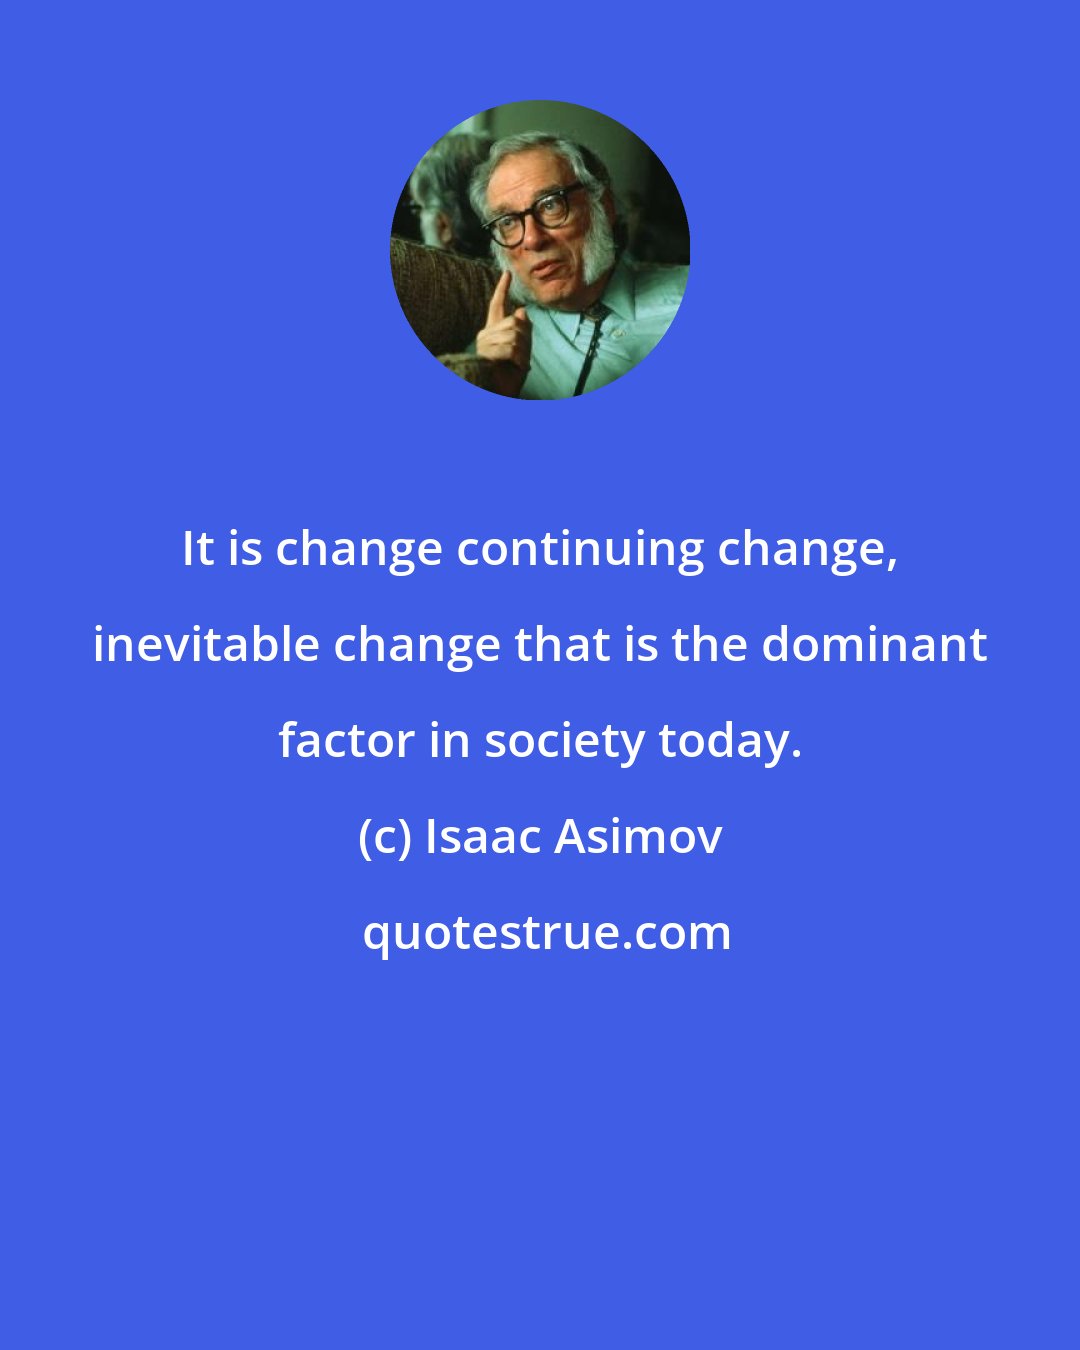 Isaac Asimov: It is change continuing change, inevitable change that is the dominant factor in society today.